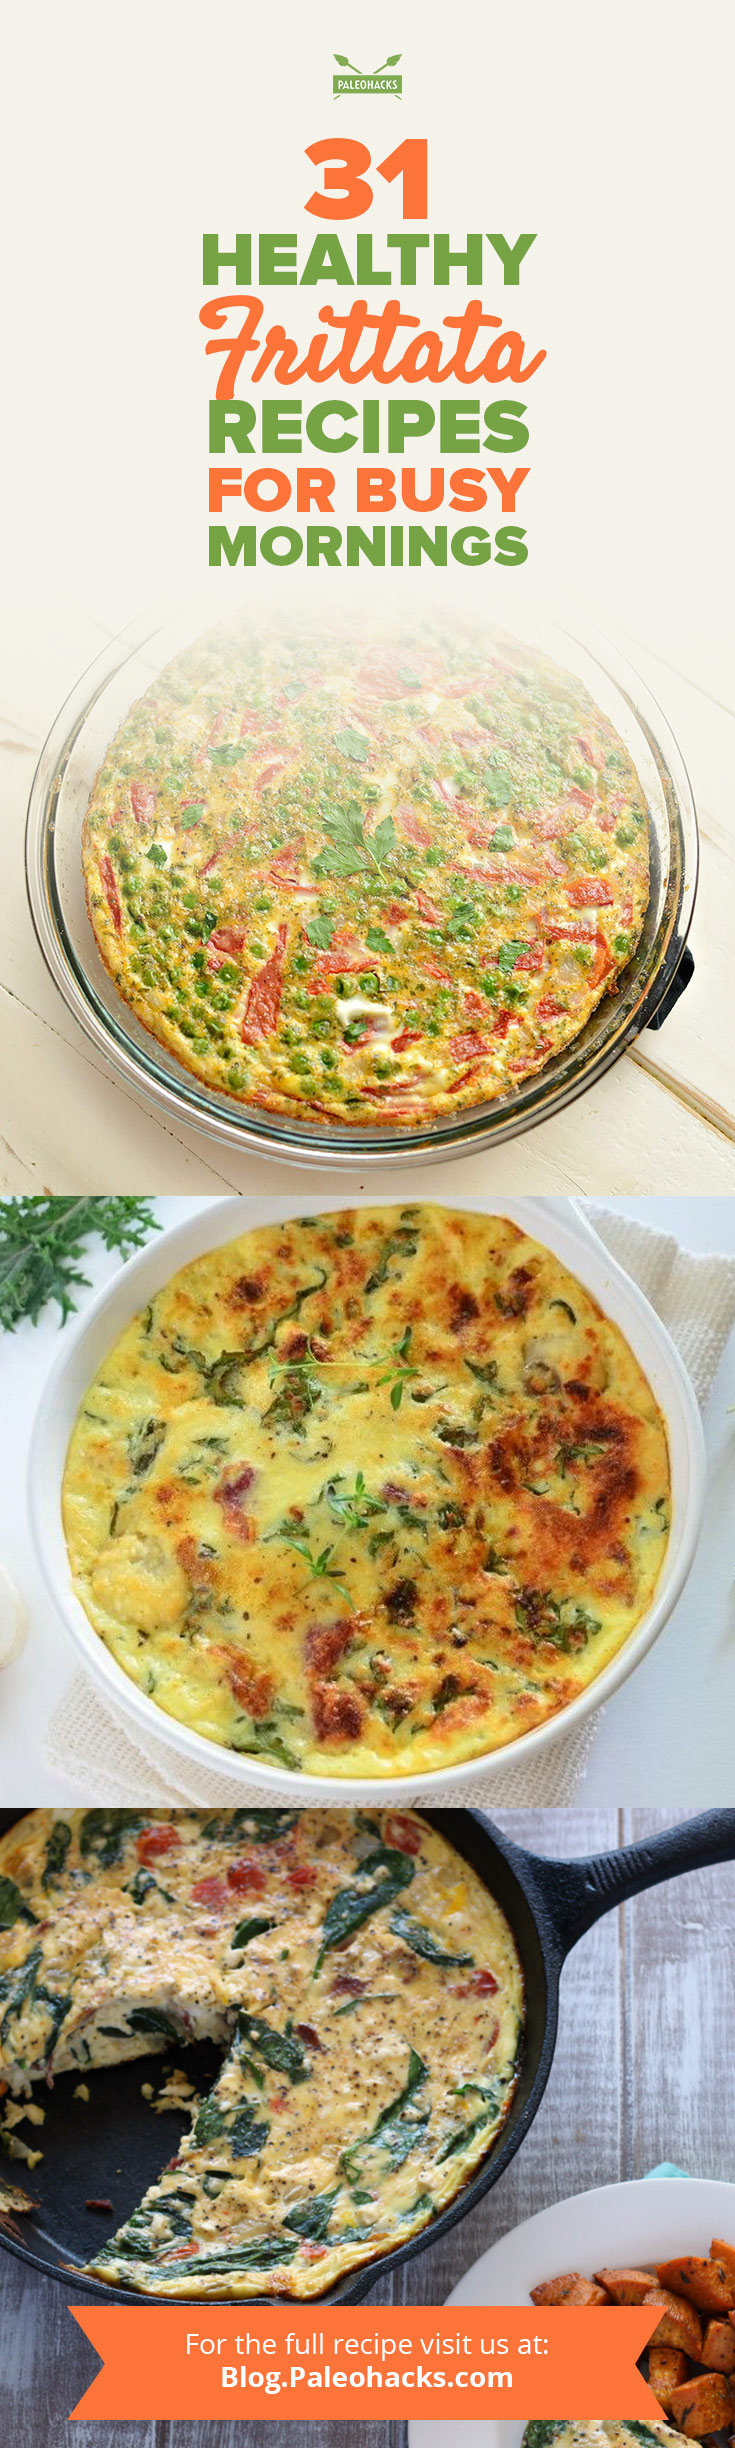 Need a quick breakfast for busy weekdays? Cook up these fun and creative frittata recipes on Sunday and enjoy them the rest of the week.